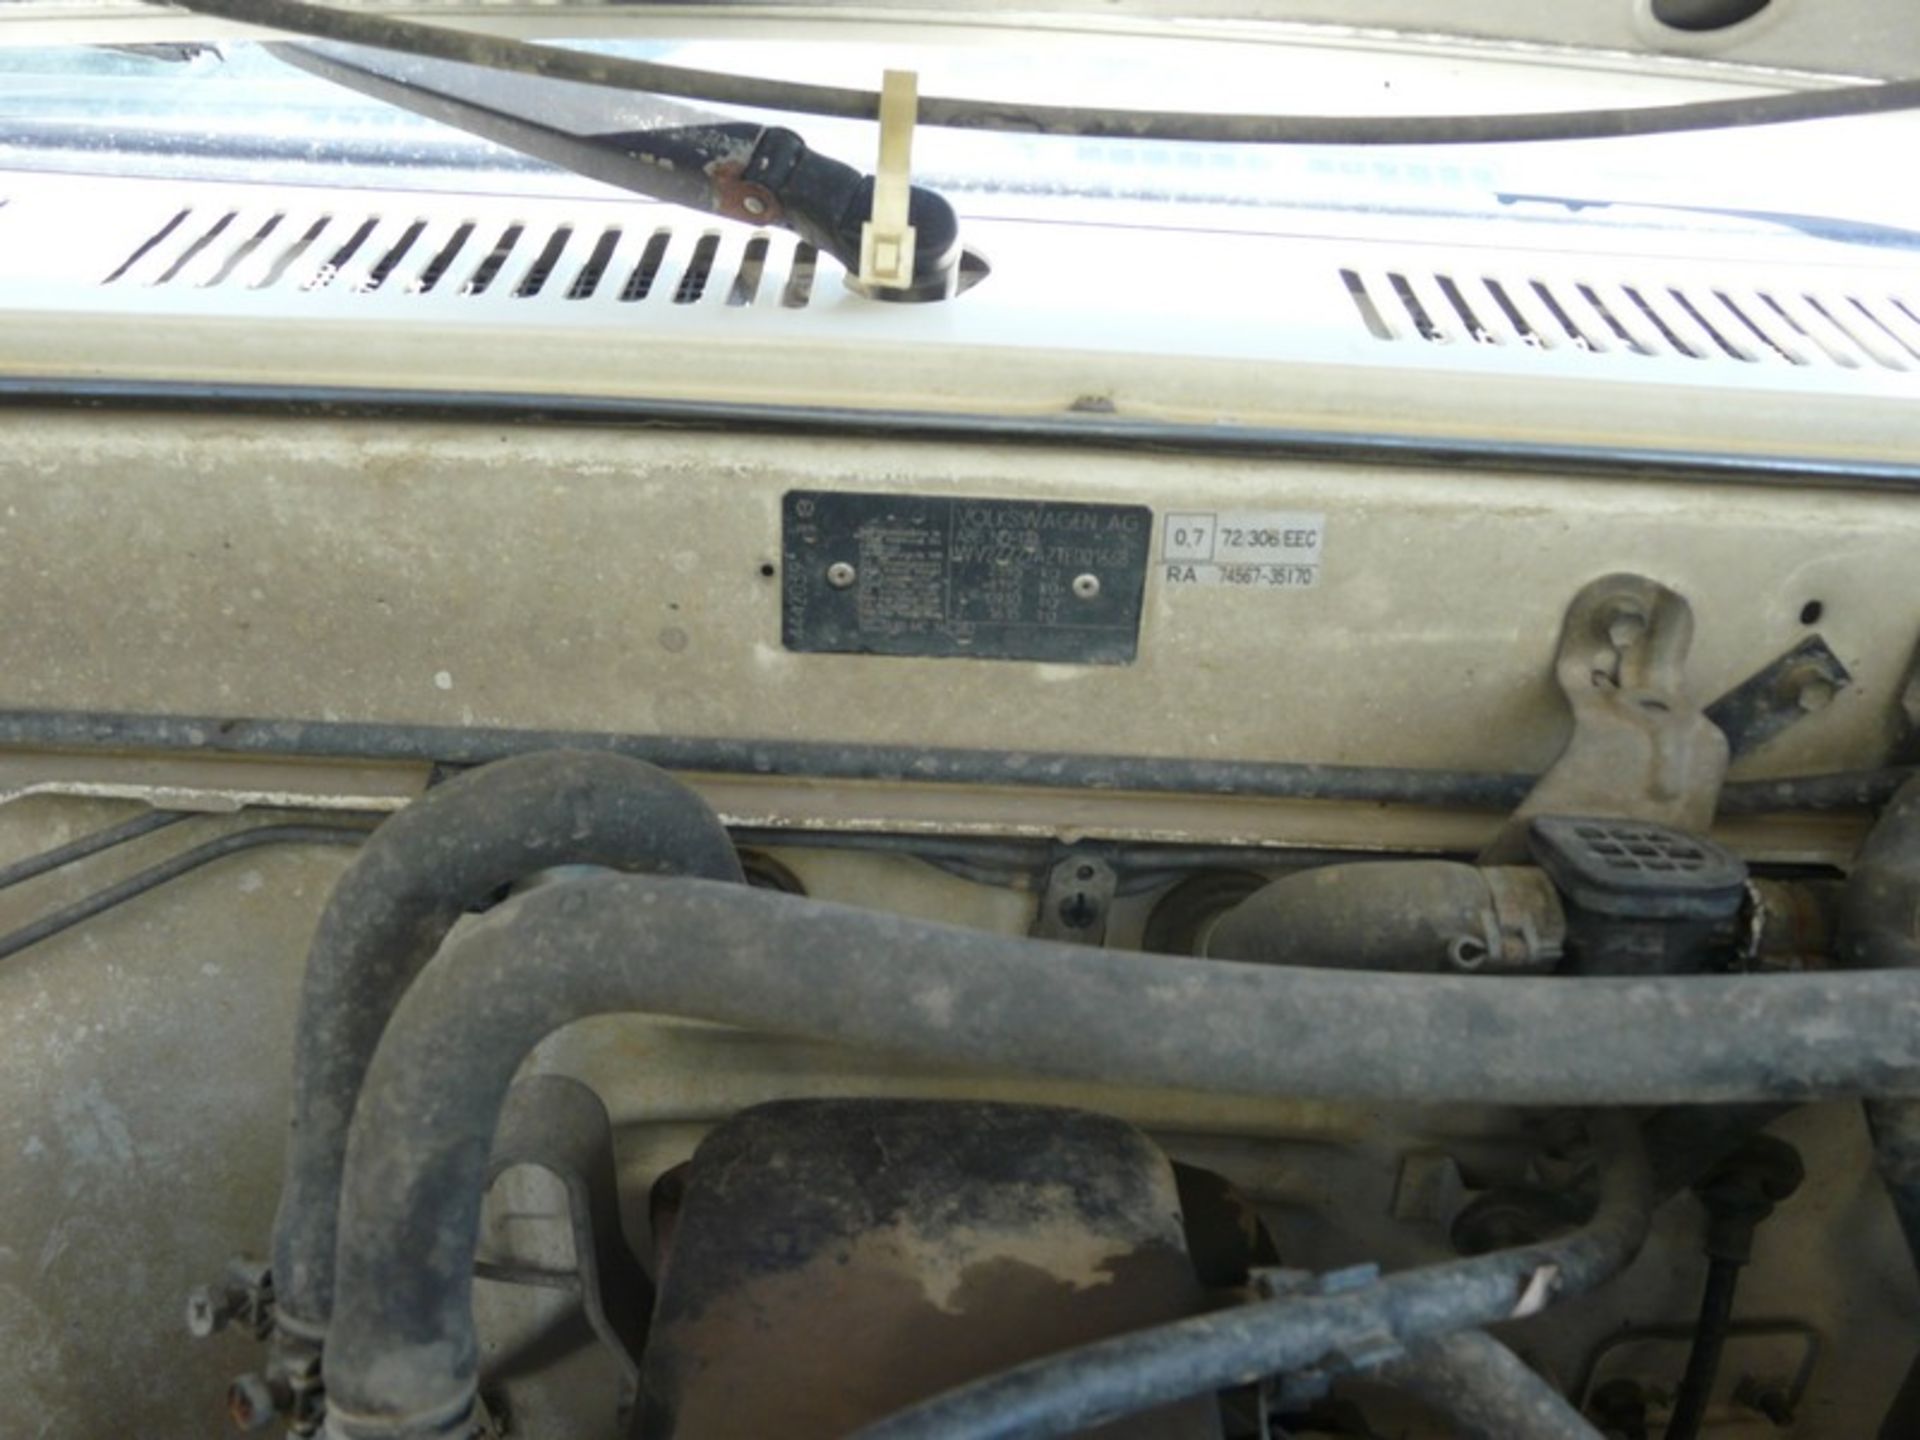 WV TARO REG NBY 4244 ,2.4 DIESEL ,KM 188583,Pick Up Truck ,2 Doors, Service Book Available , Year: - Image 15 of 15